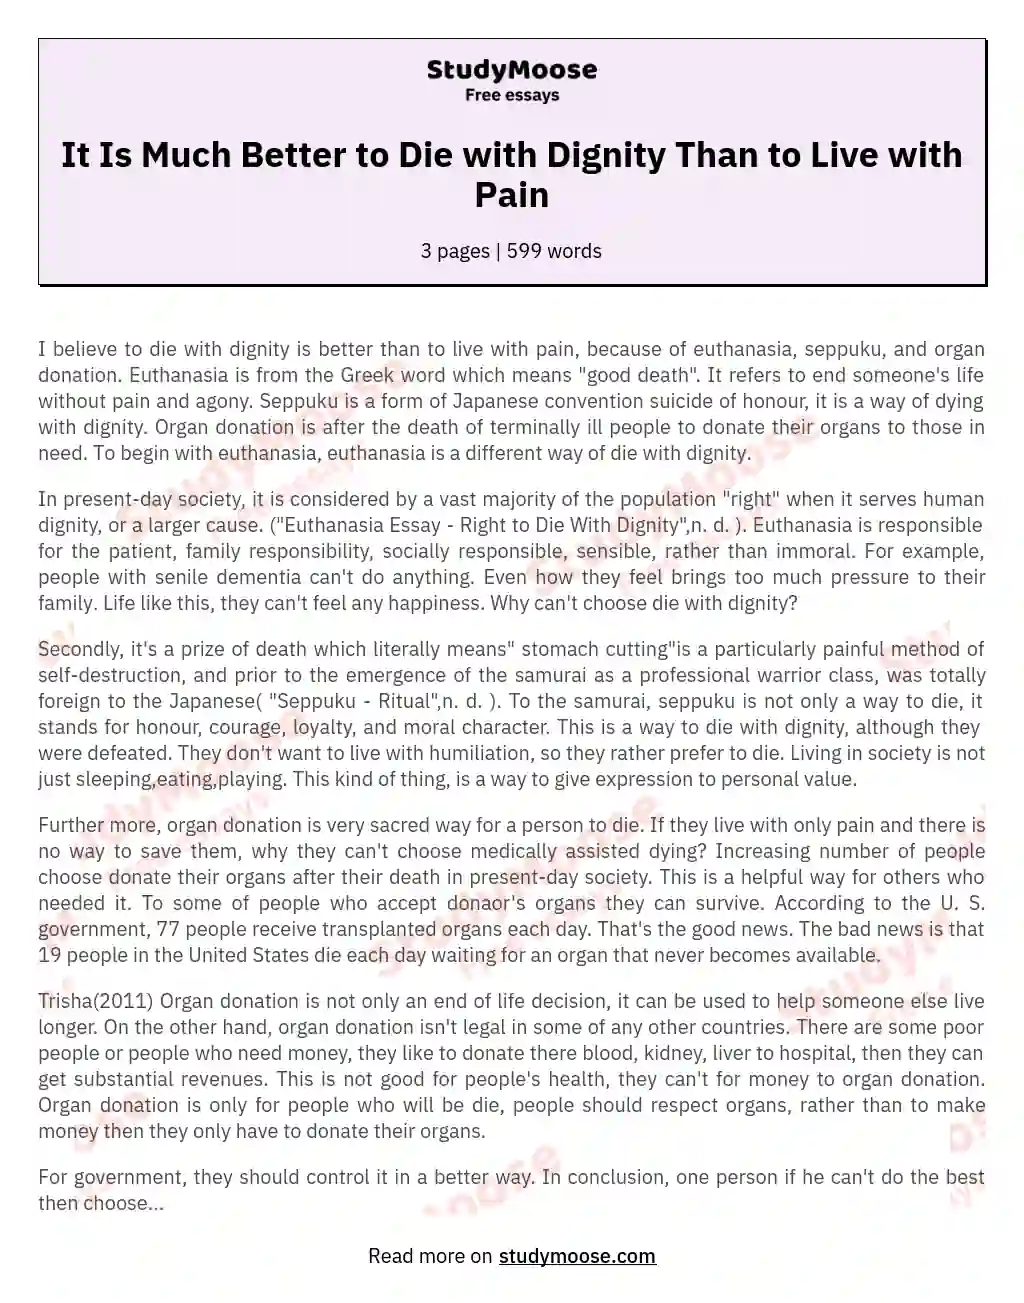 It Is Much Better to Die with Dignity Than to Live with Pain